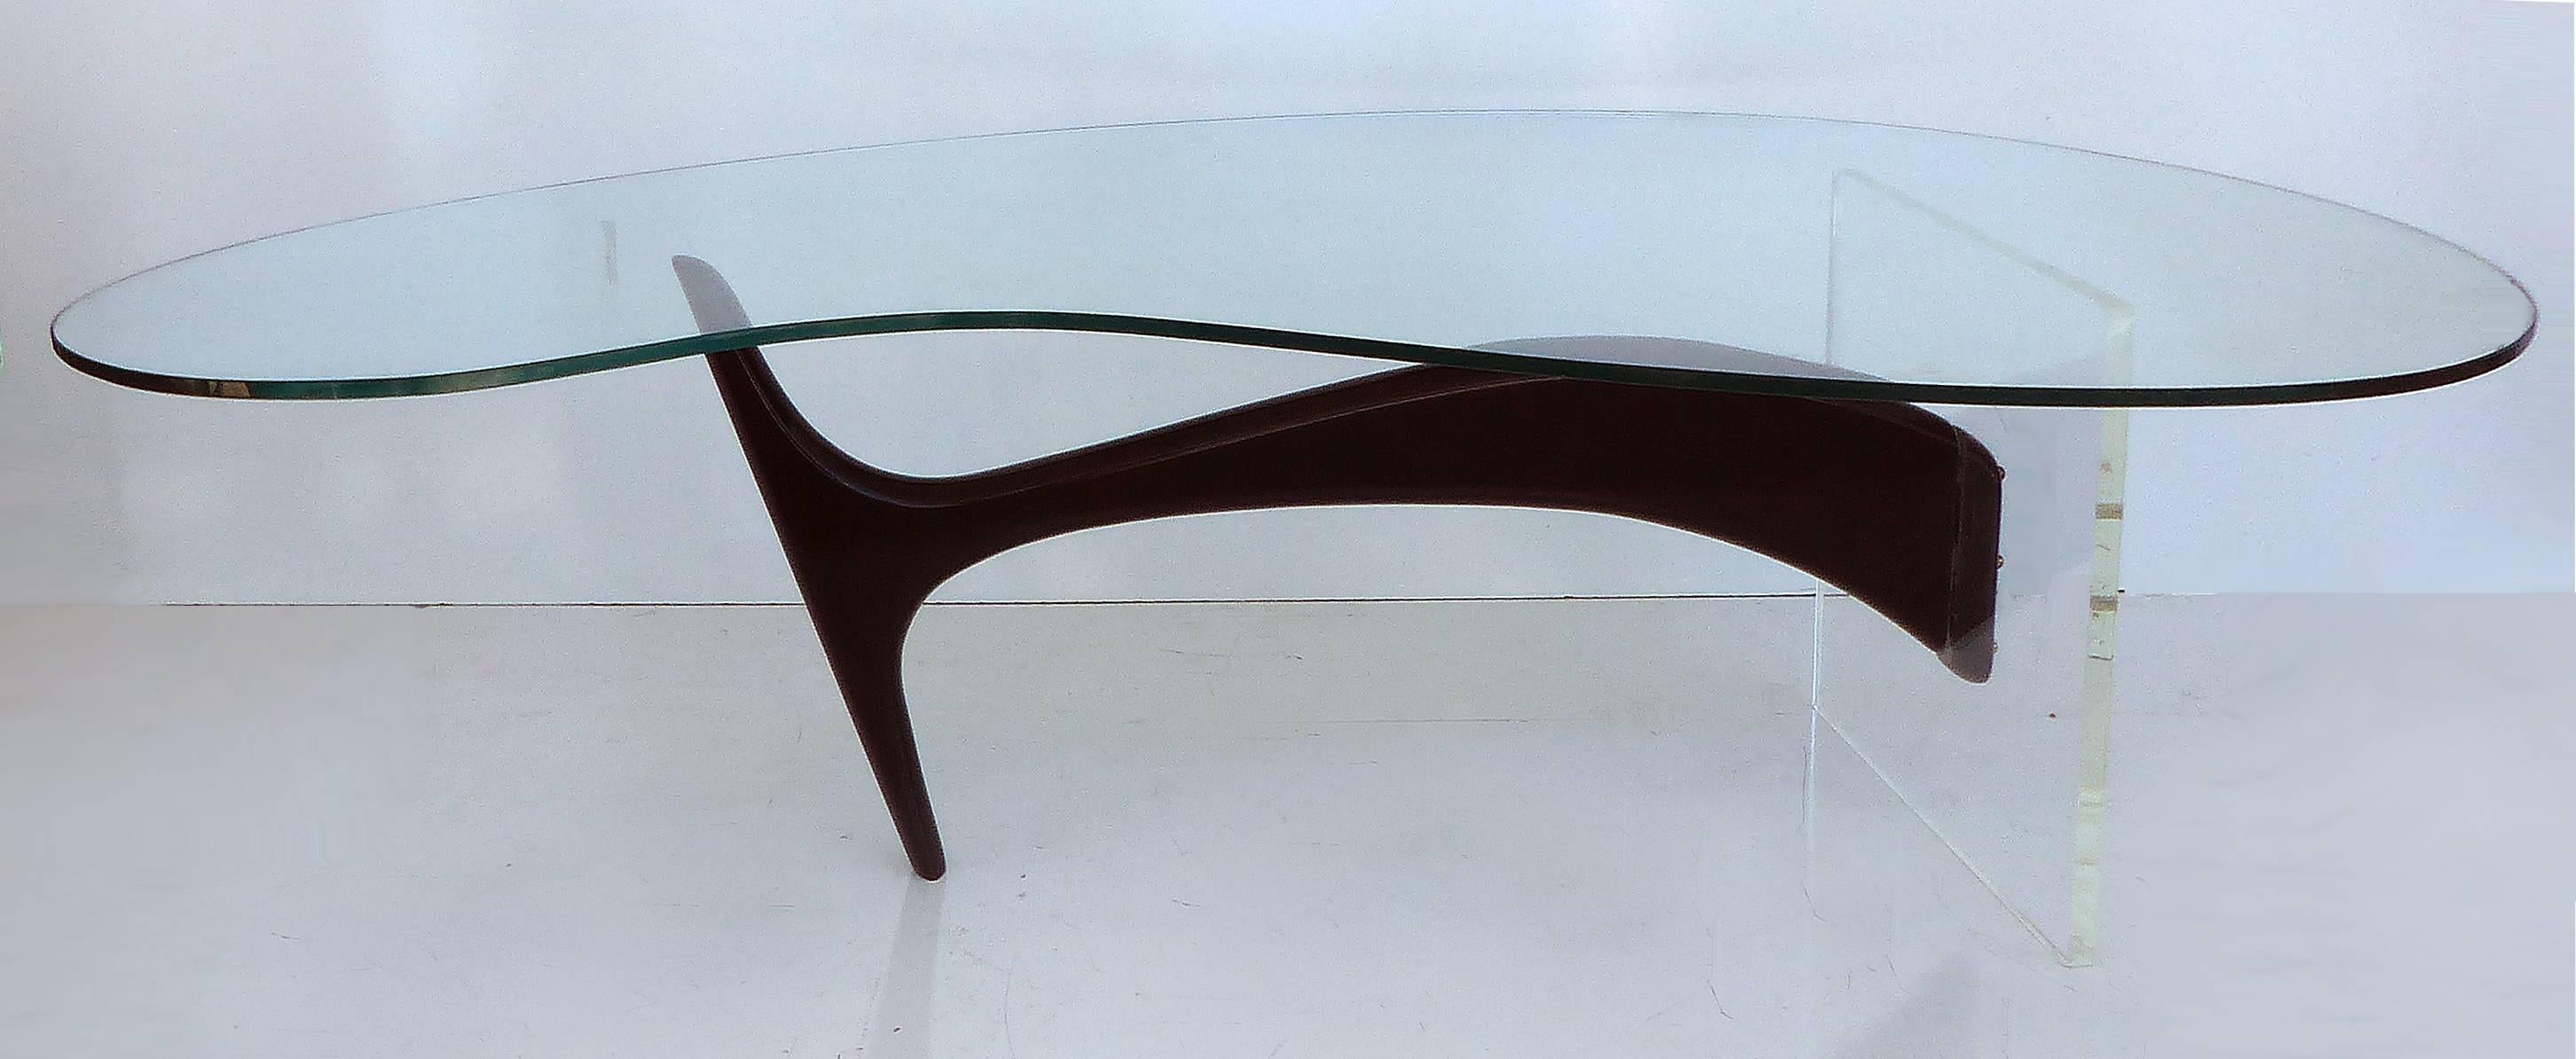 A sculptural lacquered wood and Lucite coffee table created in the manner of the Vladimir Kagan Omnibus Collection. The floating base supports a biomorphic shaped glass top. The glass shows surface wear commensurate with and including two minor edge